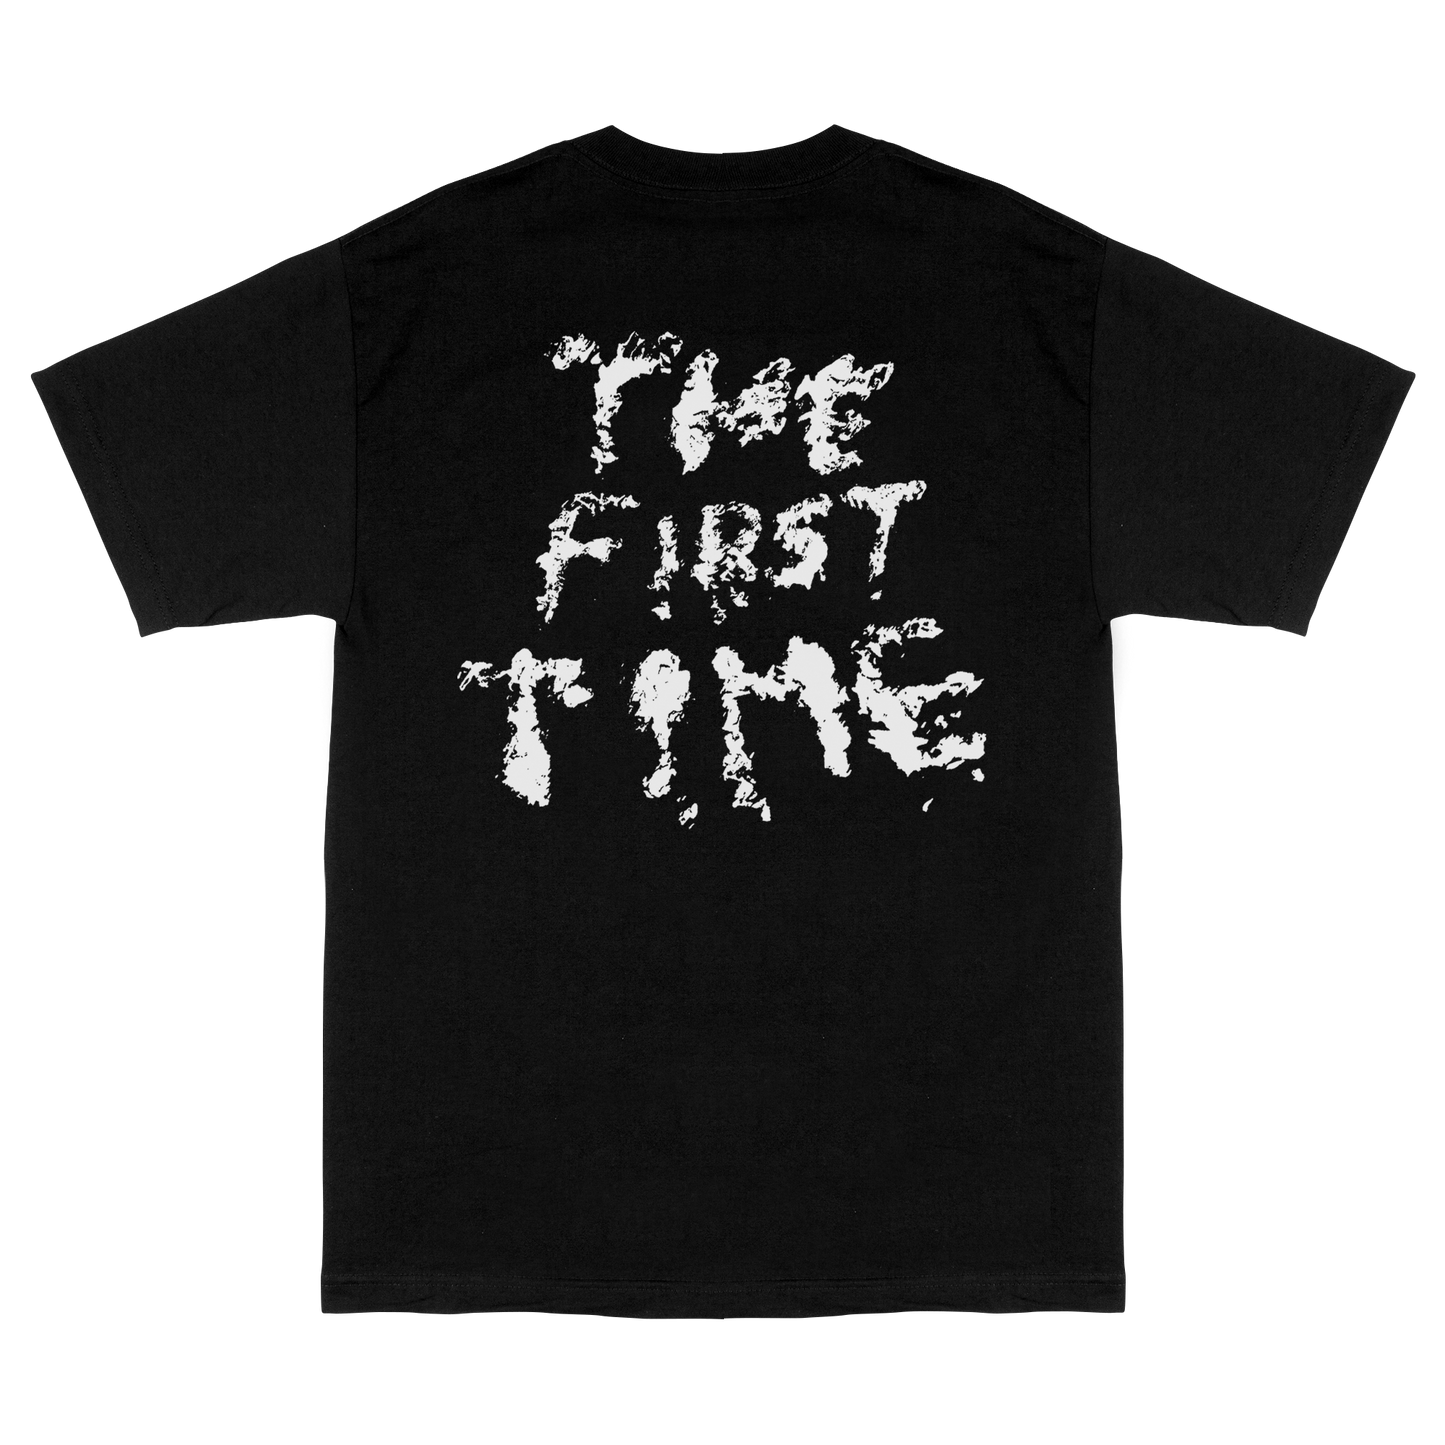 The First Time Band-Aid Tee